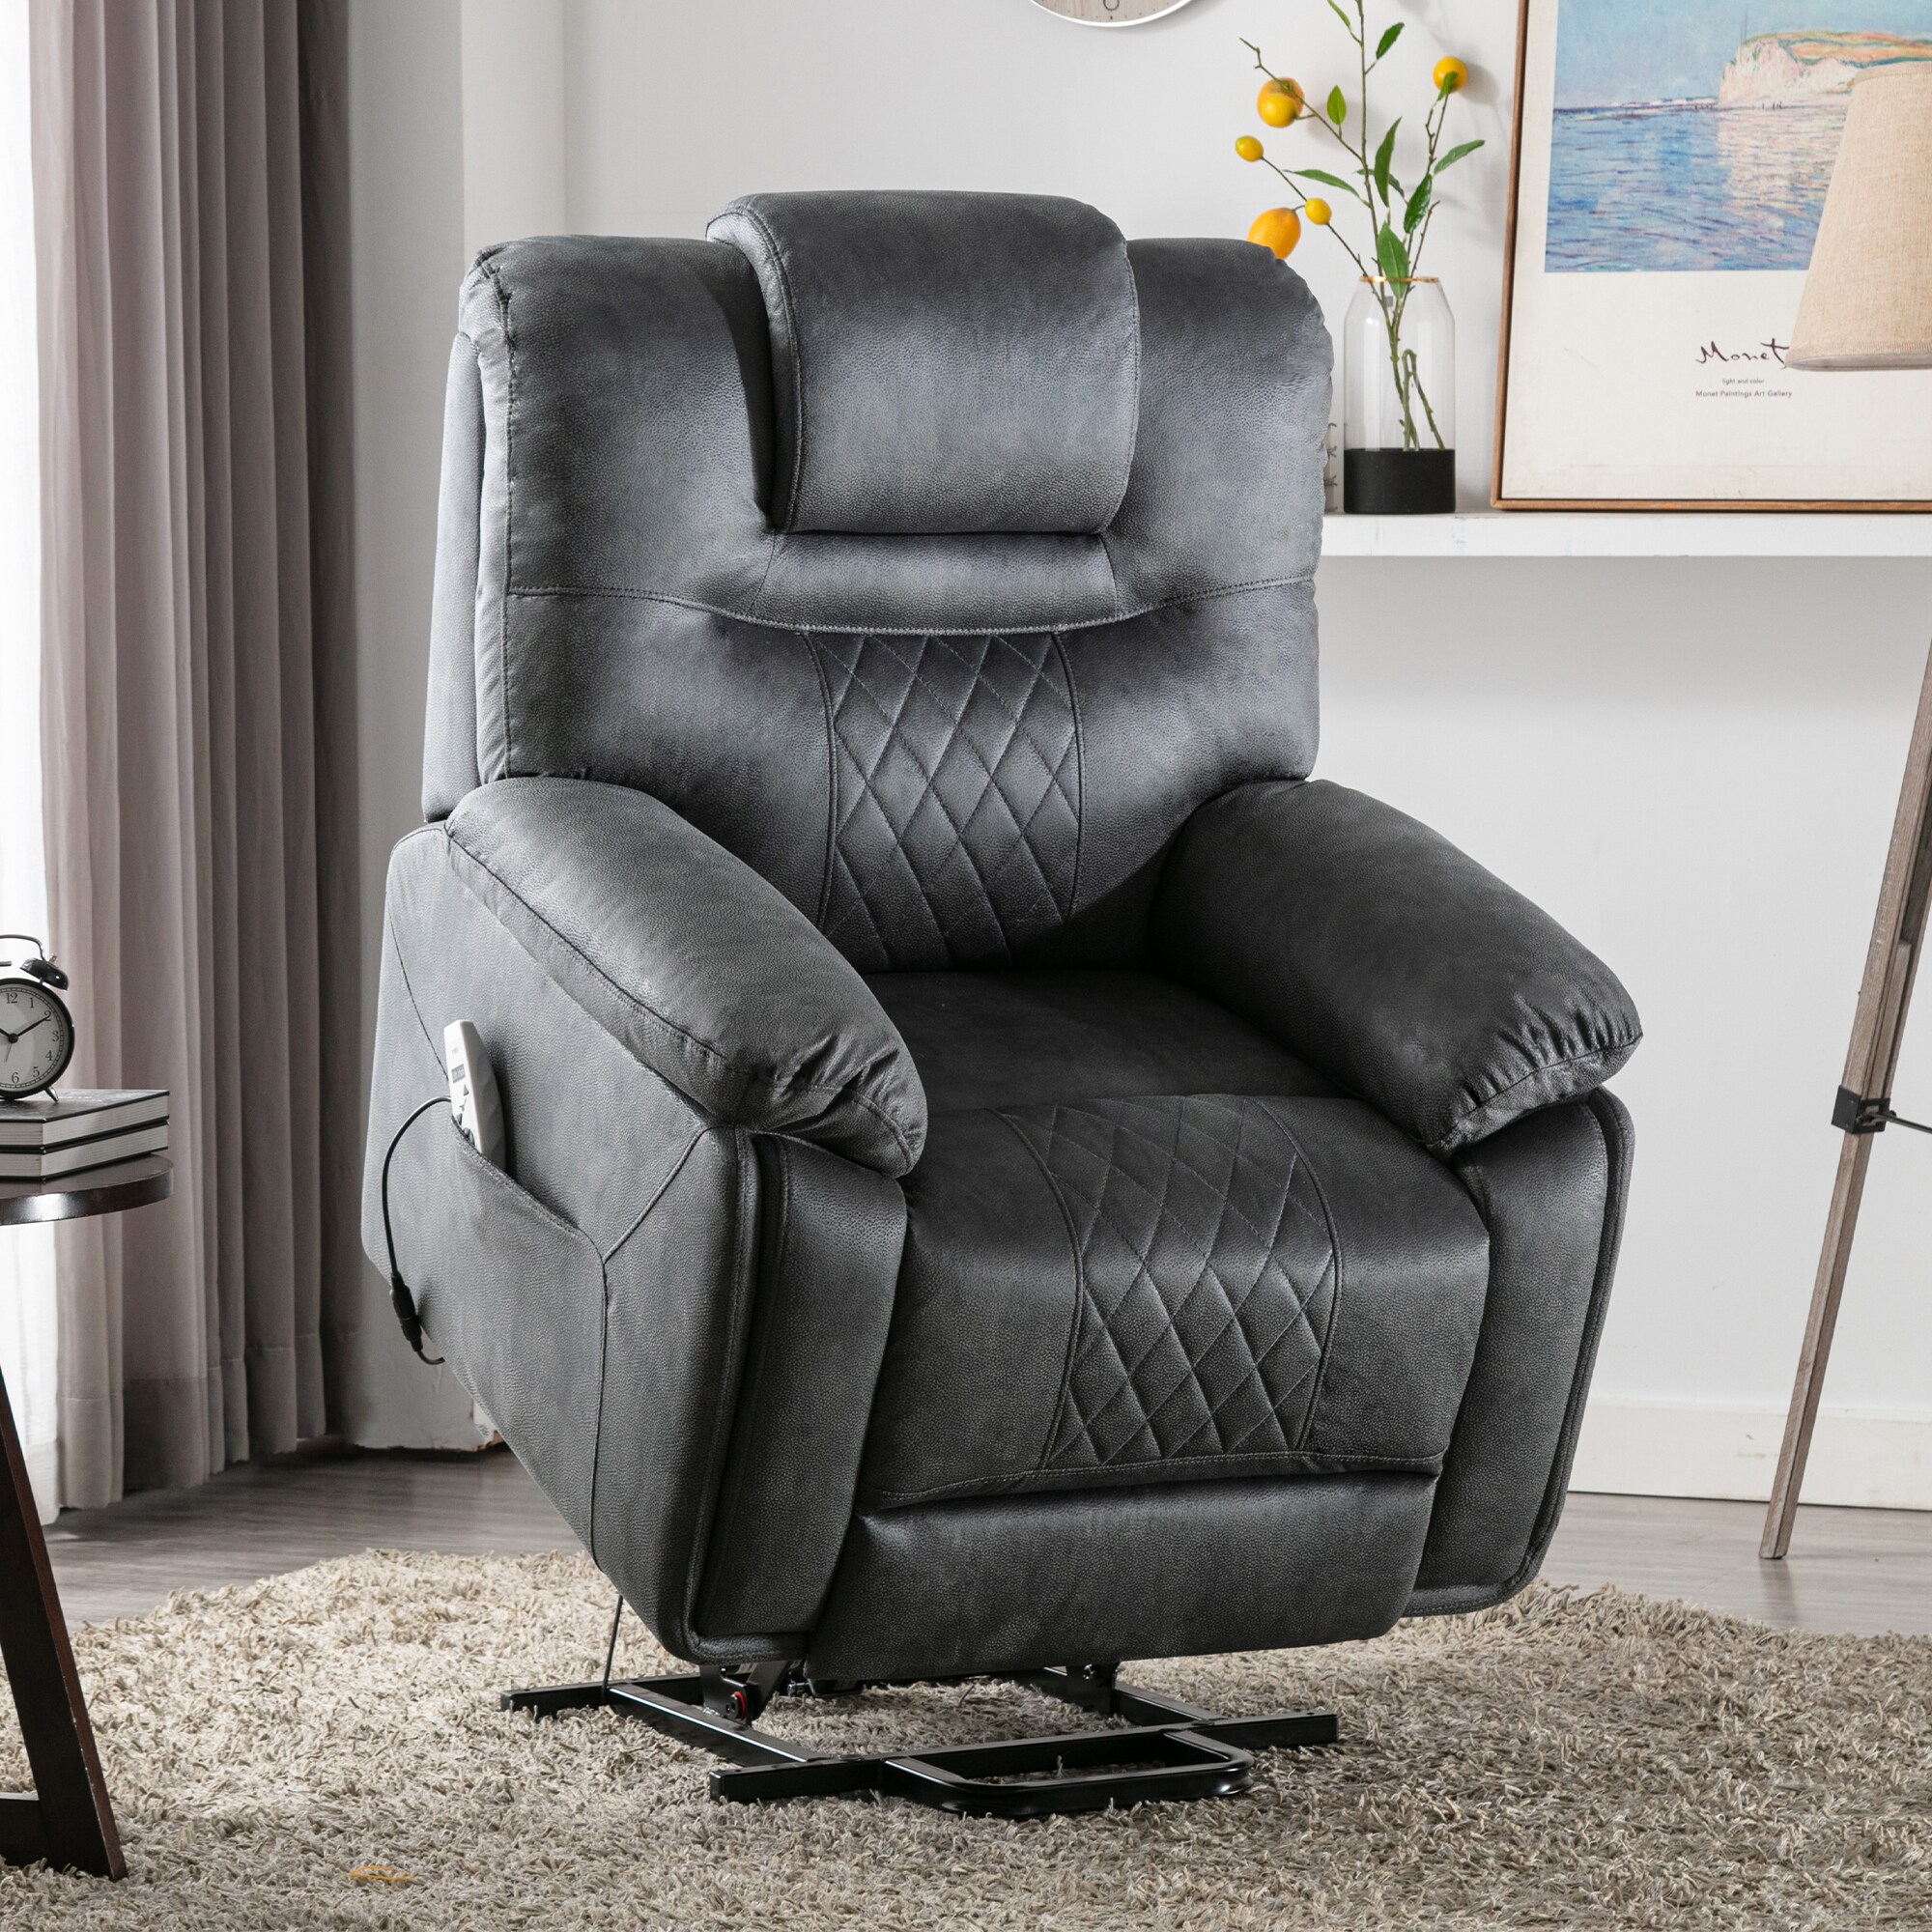 Claude Dual Power Headrest & Lumbar Support Recliner Chair in Light Grey  Genuine Leather by Armen